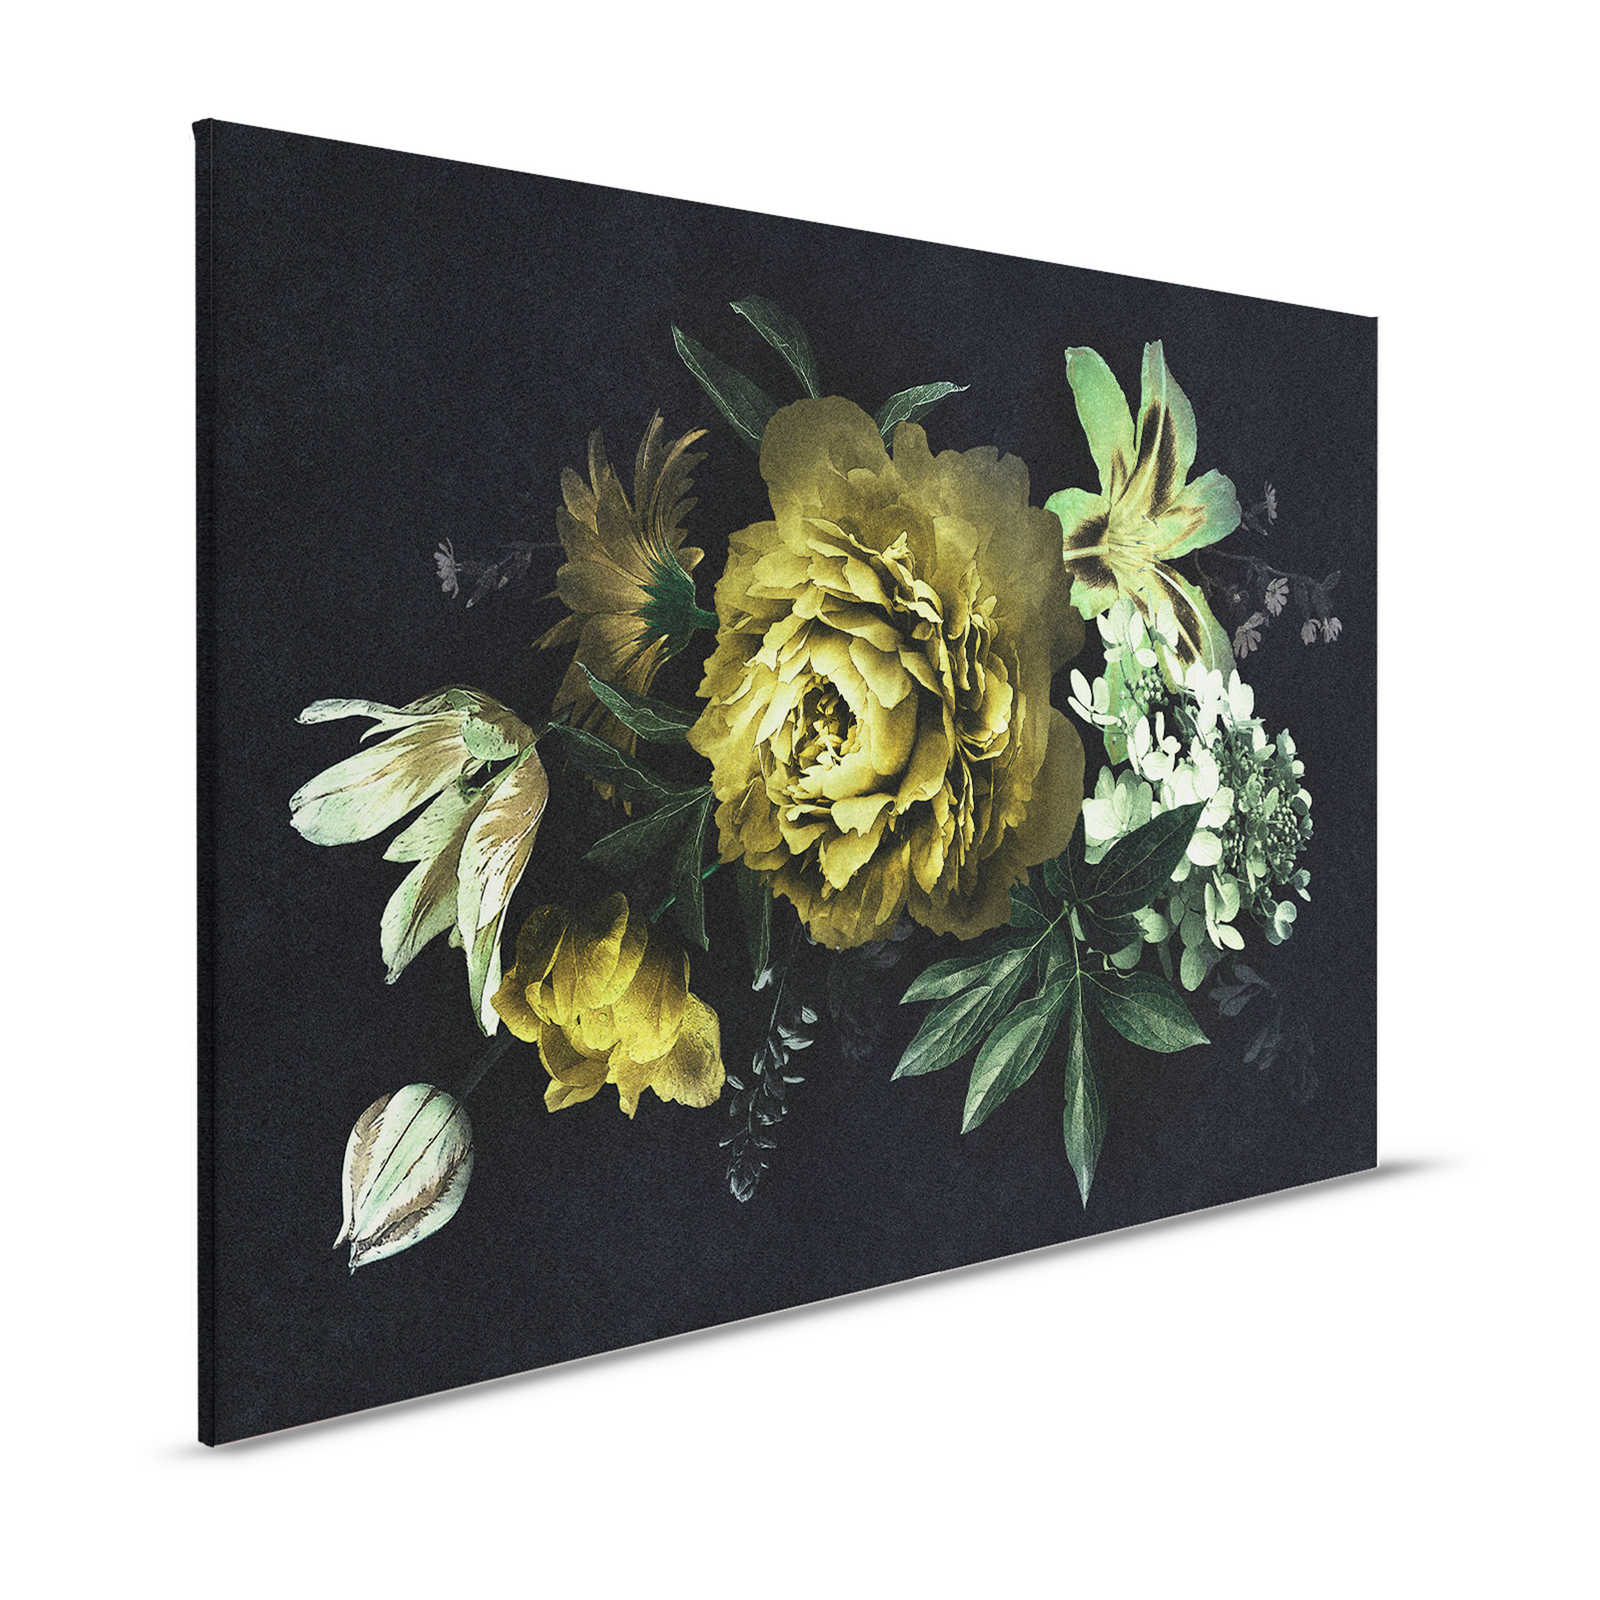         Drama queen 2 - Bouquet canvas picture in cardboard structure in green - 0.90 m x 0.60 m
    